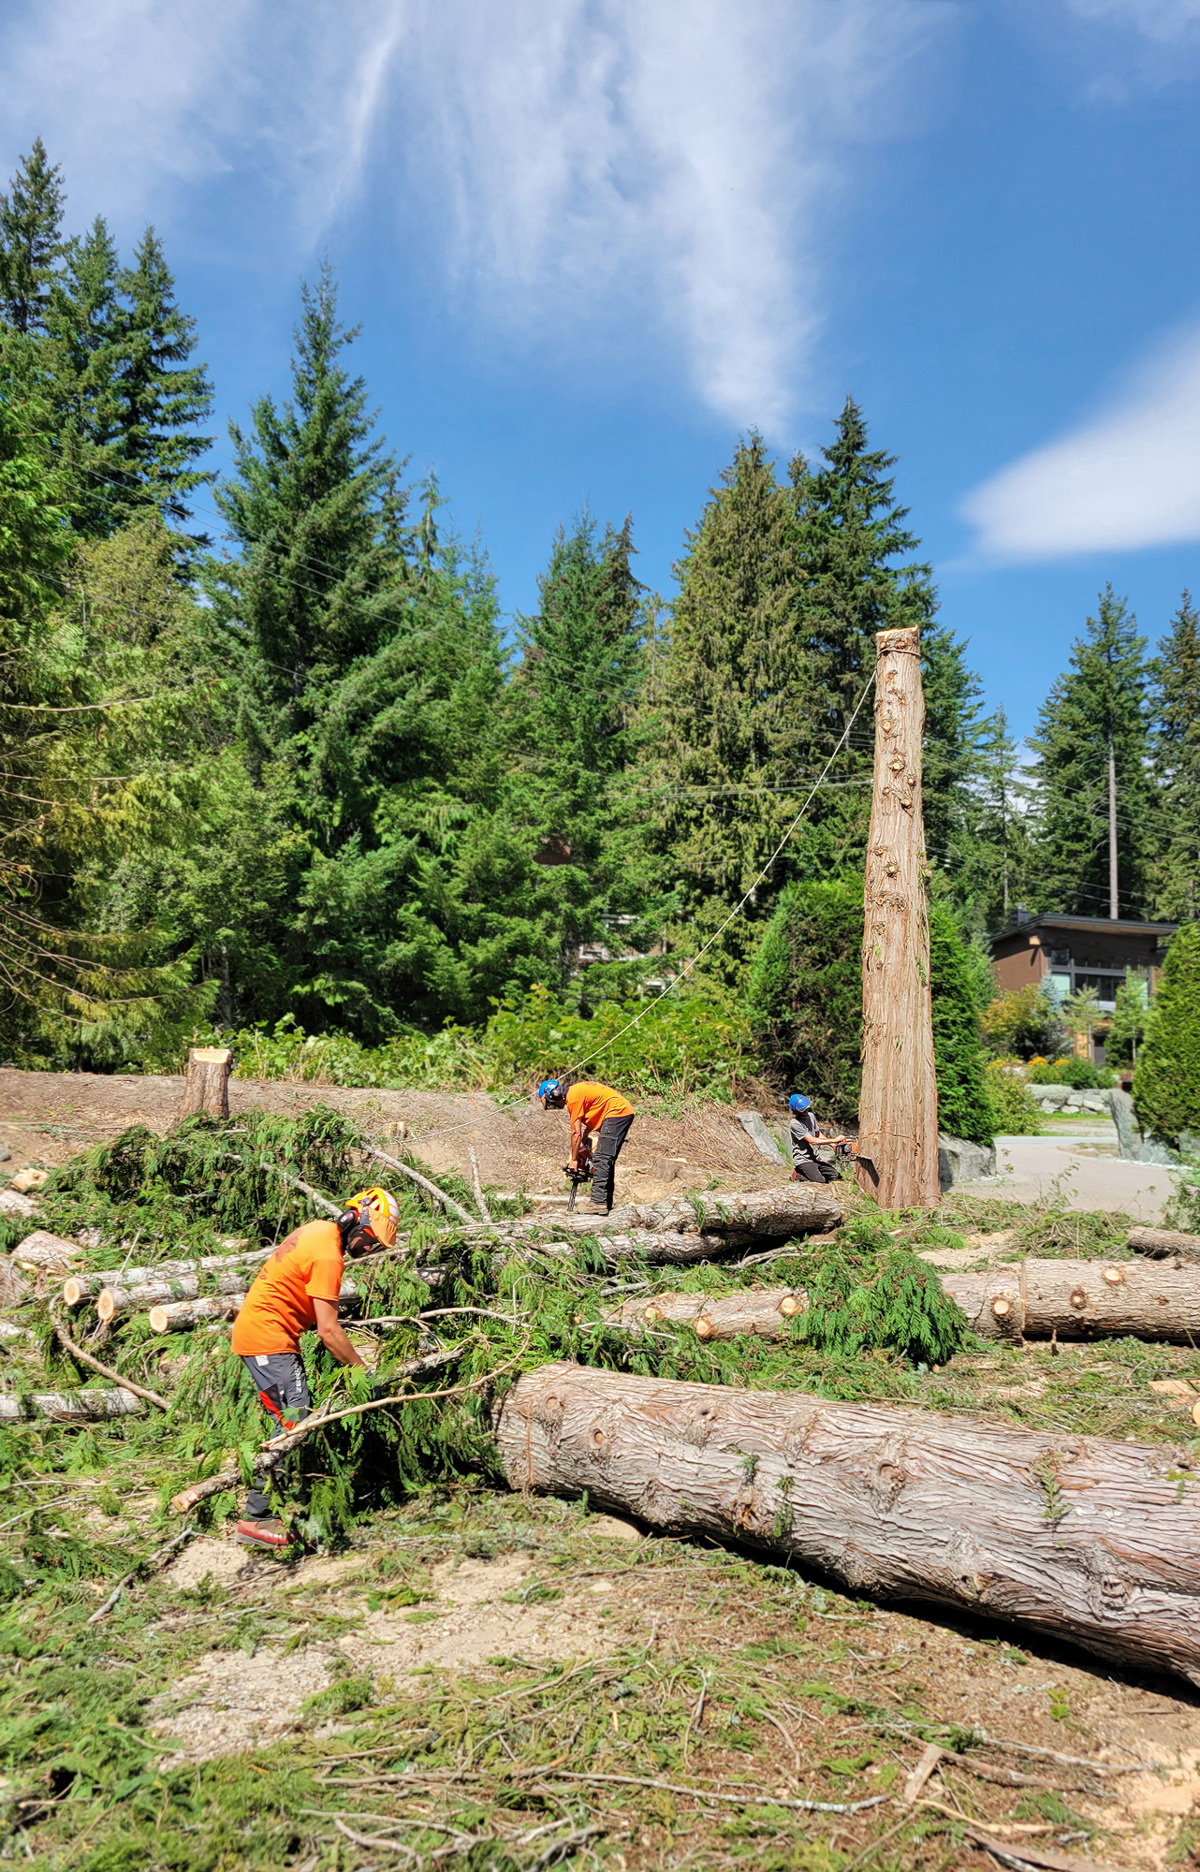 Three Garibaldi Tree employees clearing a residential lot in Whistler, B.C. One employee is hauling branches, another is using a chainsaw to fell part of a standing tree, and another is using a chainsaw to cut up a fallen tree. It's a sunny day, and there are trees in the background.